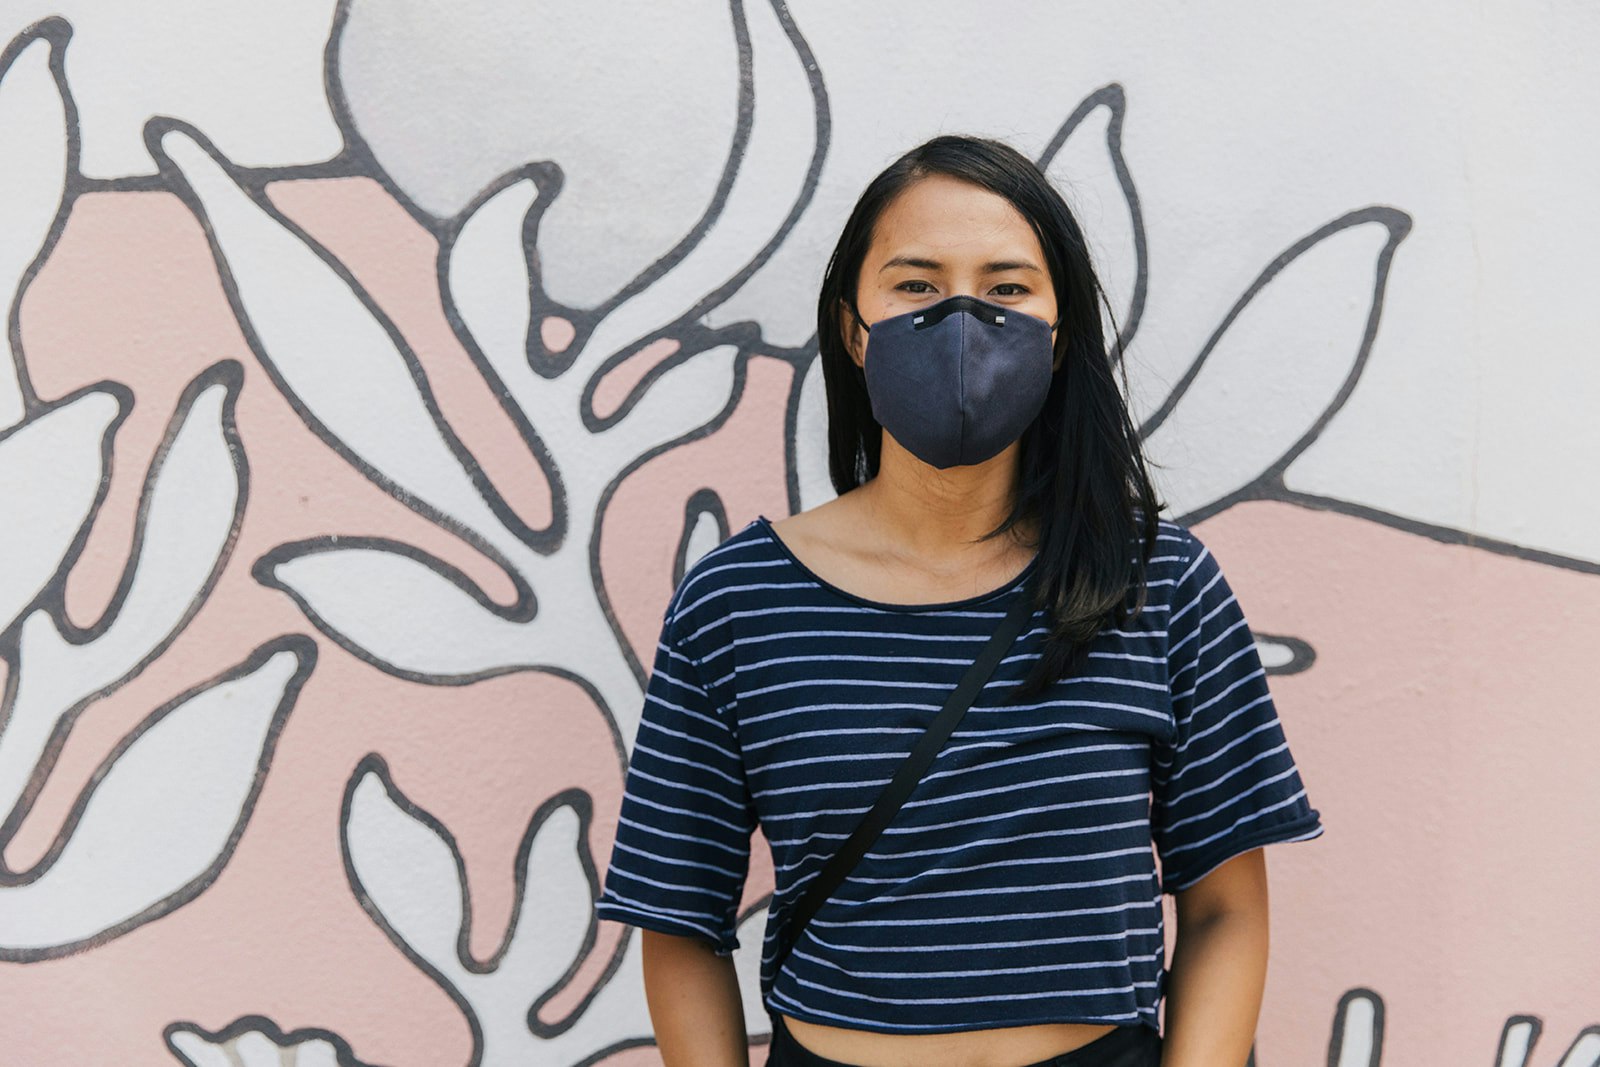 An Asian woman wearing a stylish navy face mask stands in front of a patterned screen